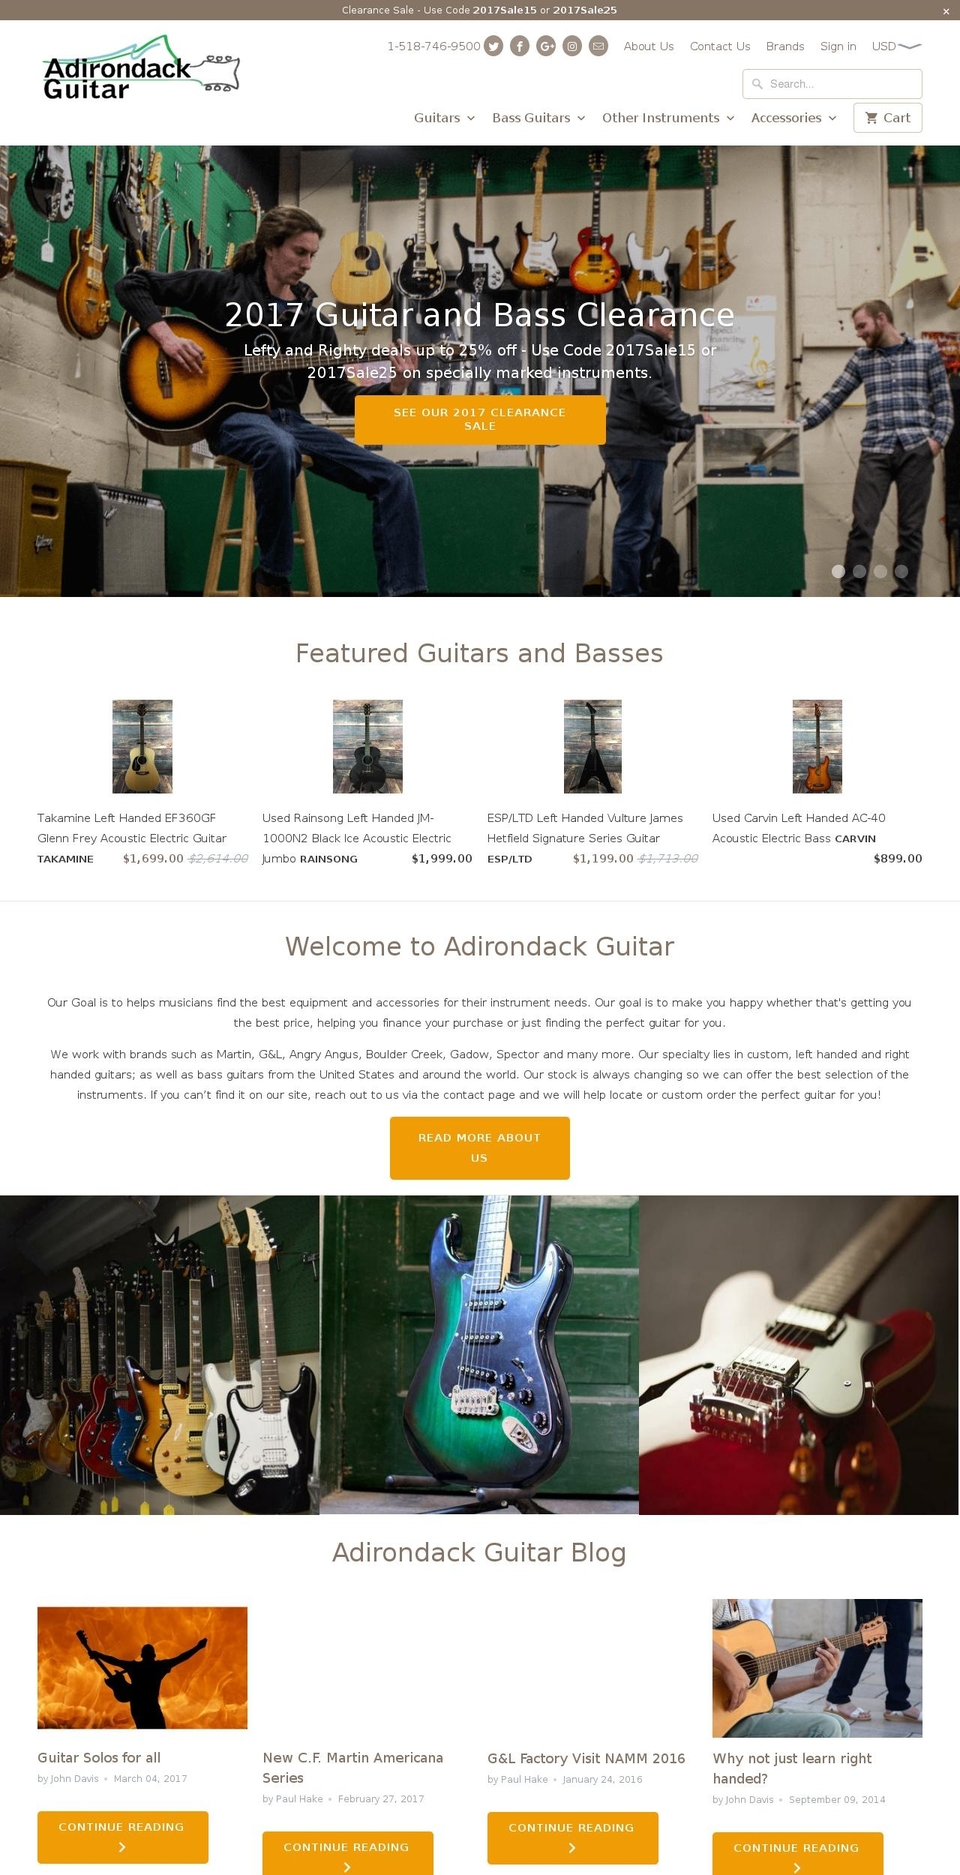 August Shopify theme site example adkguitar.com